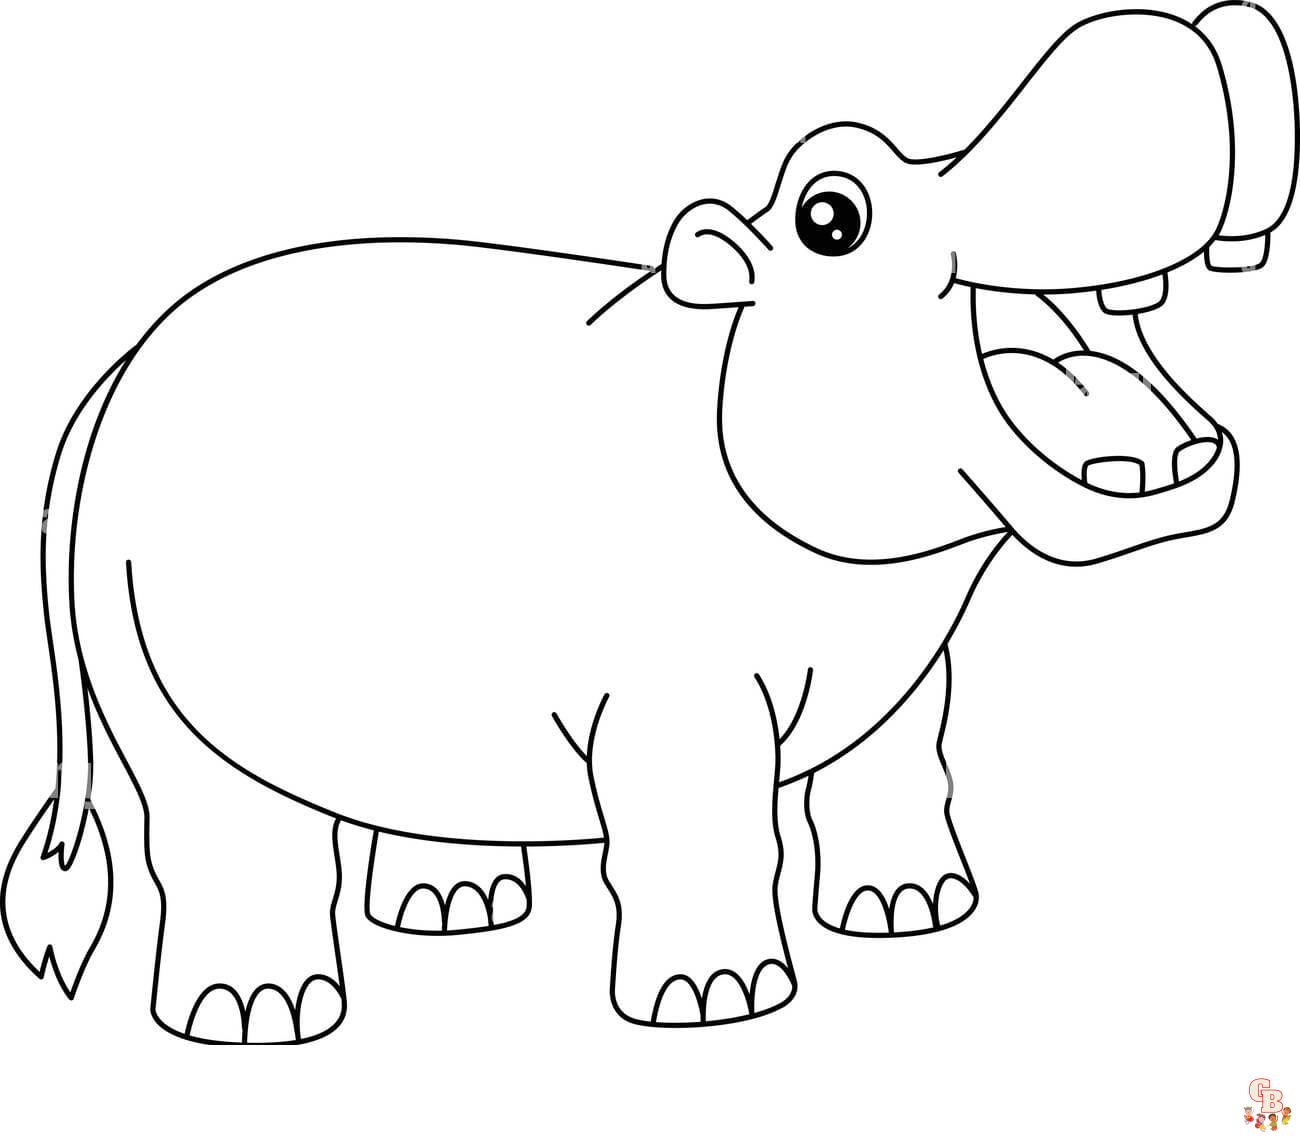 Hippo coloring pages free printable